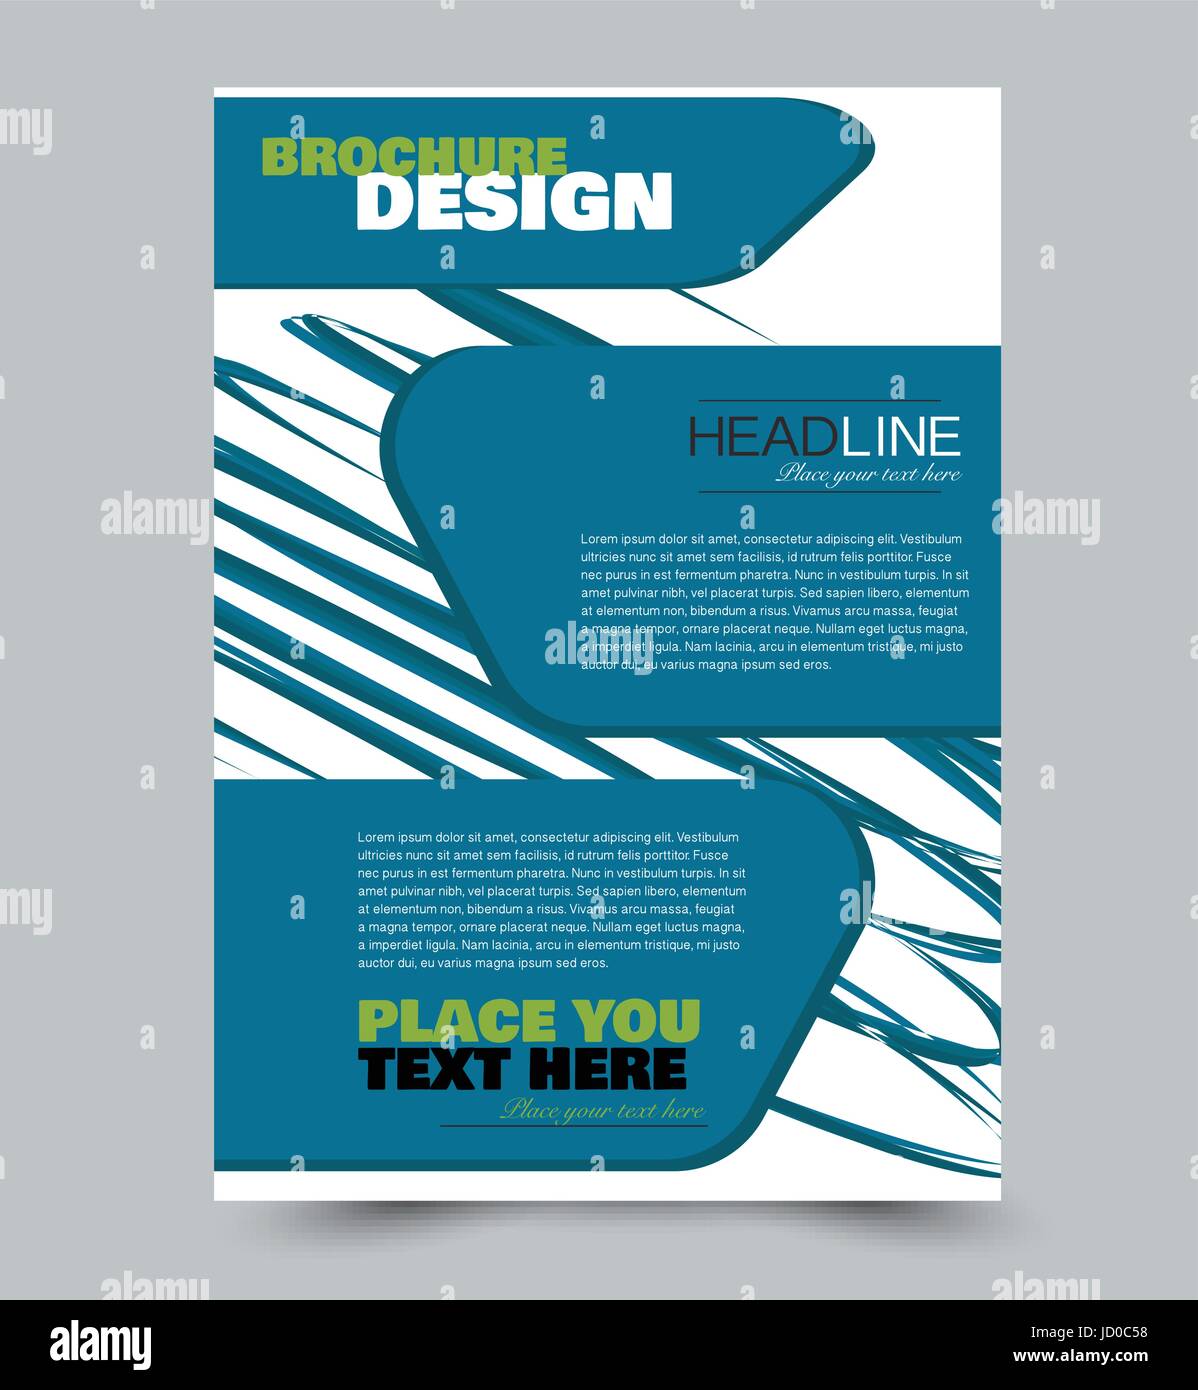 Business Flyer Template Size Brochure Design Annual Report Stock Vector Image Art Alamy